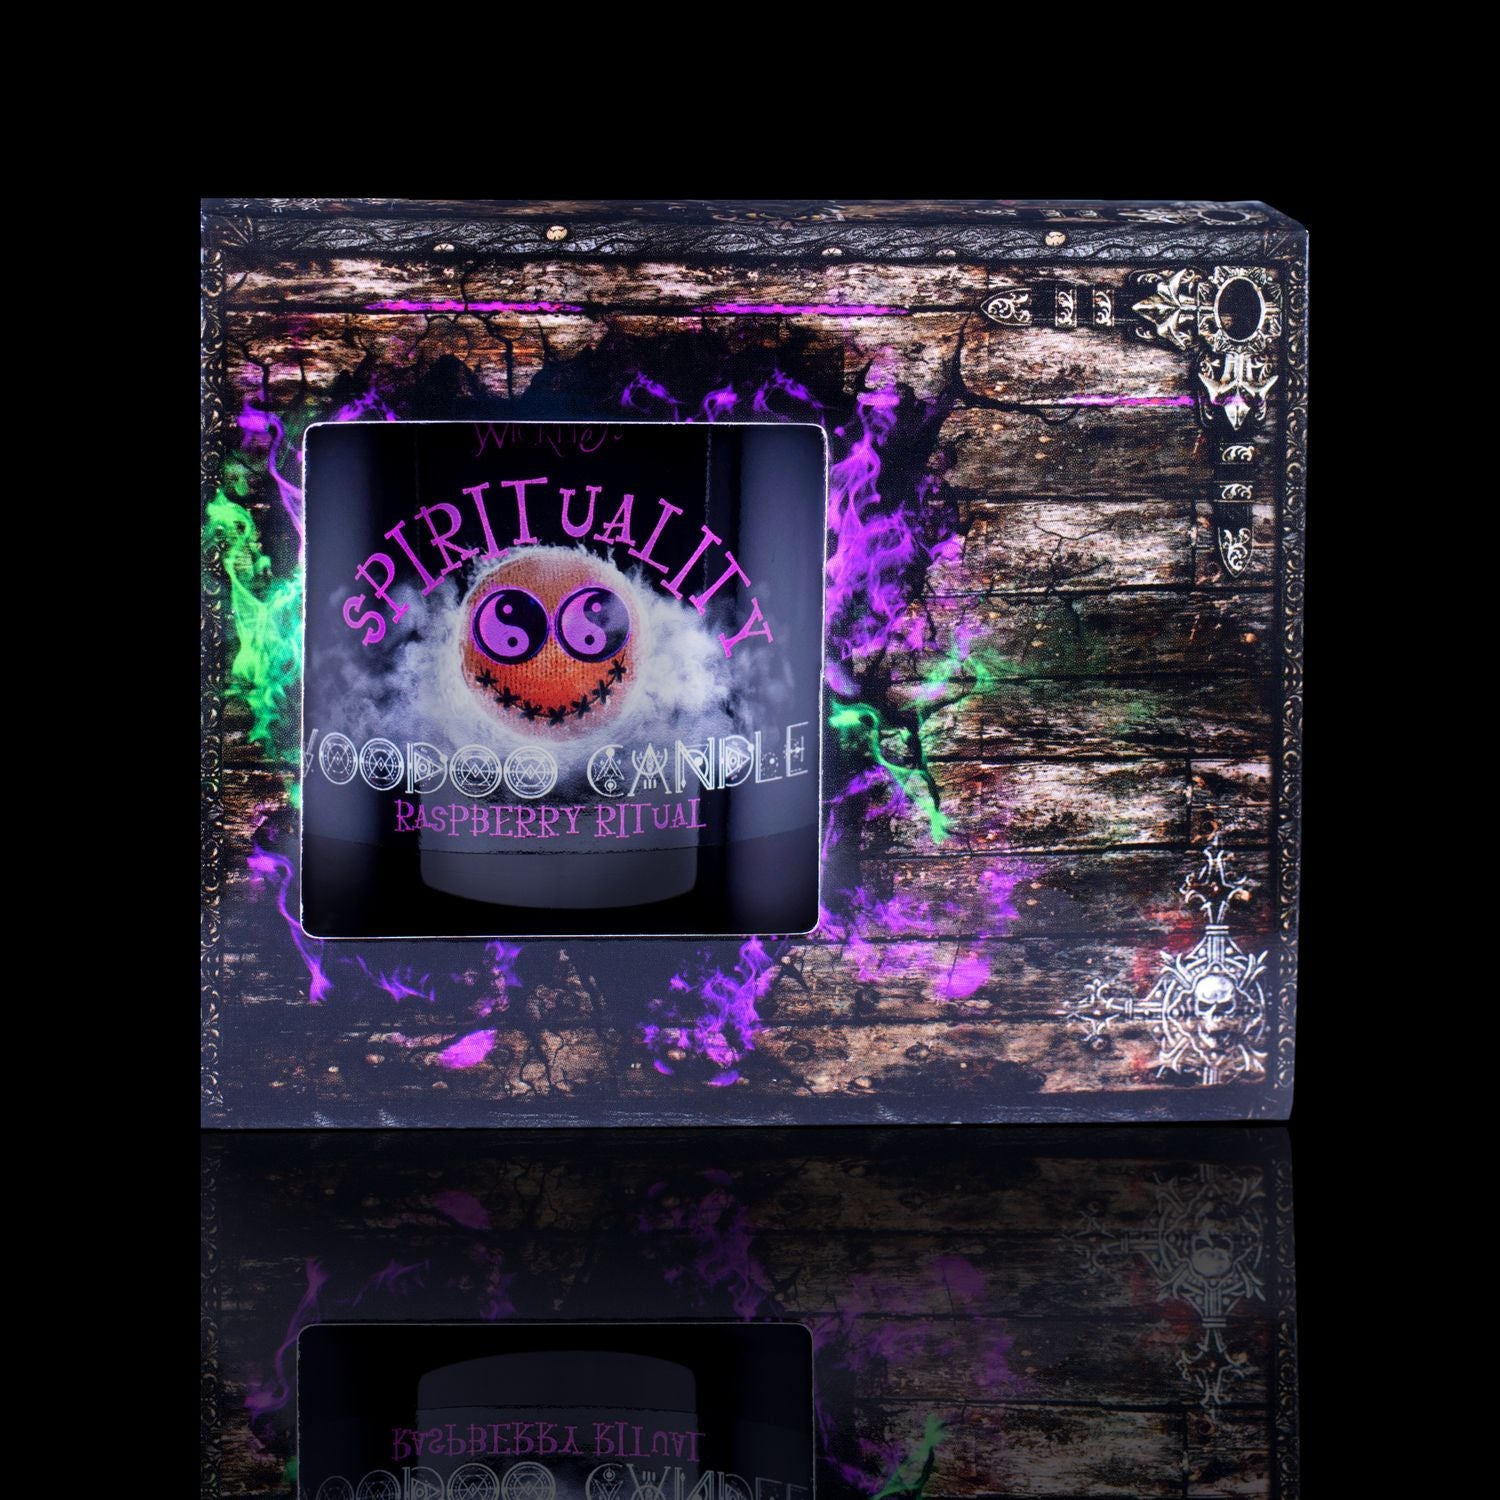 The Perfect Spell Candle For Spirituality. Naturally Wicked Voodoo Spirituality Candle Displayed In A Haunting Treasure Chest Gift Box. The Candle Features Plant-Based Smooth Purple Wax, A Wood Wick, Purple Voodoo Doll And A Beautiful Purple Amethyst Crystal Wand.